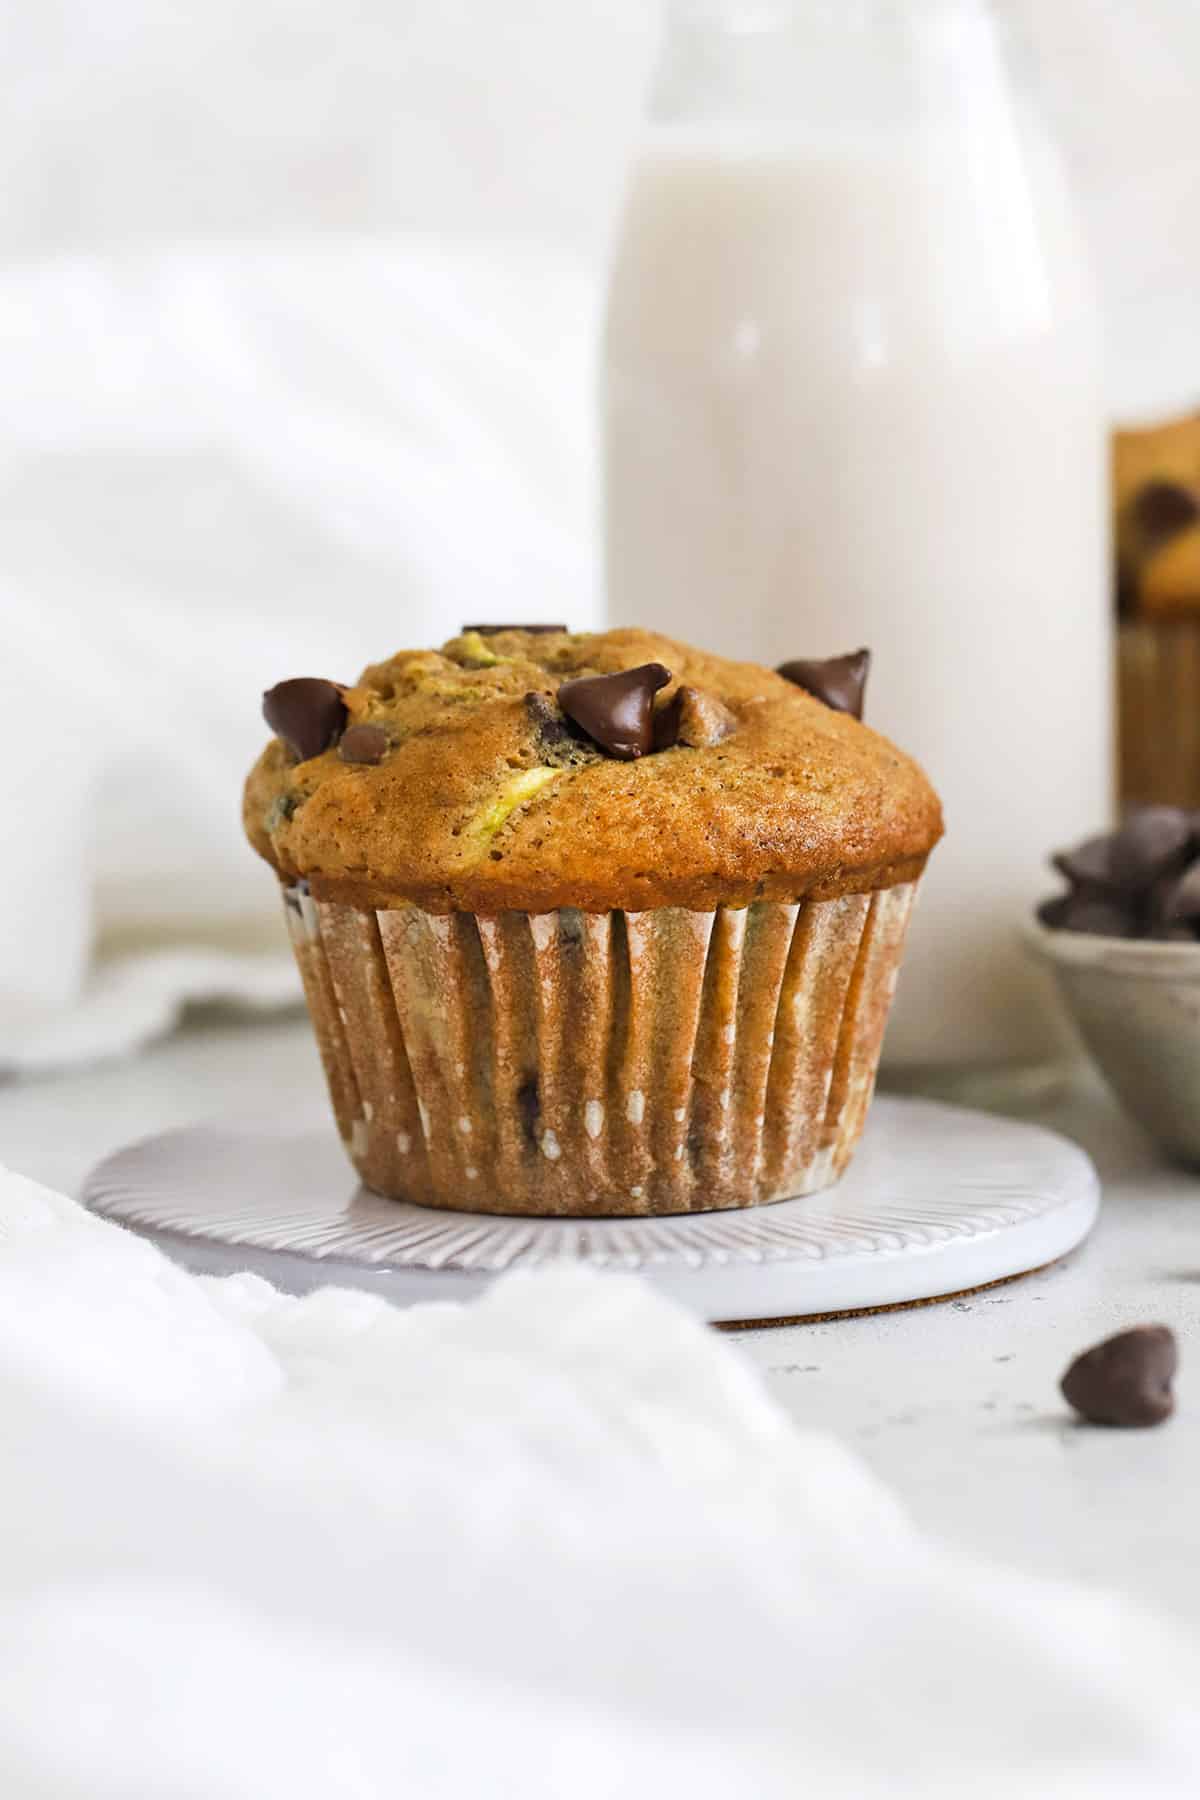 Front view of a moist gluten-free zucchini muffin with chocolate chips